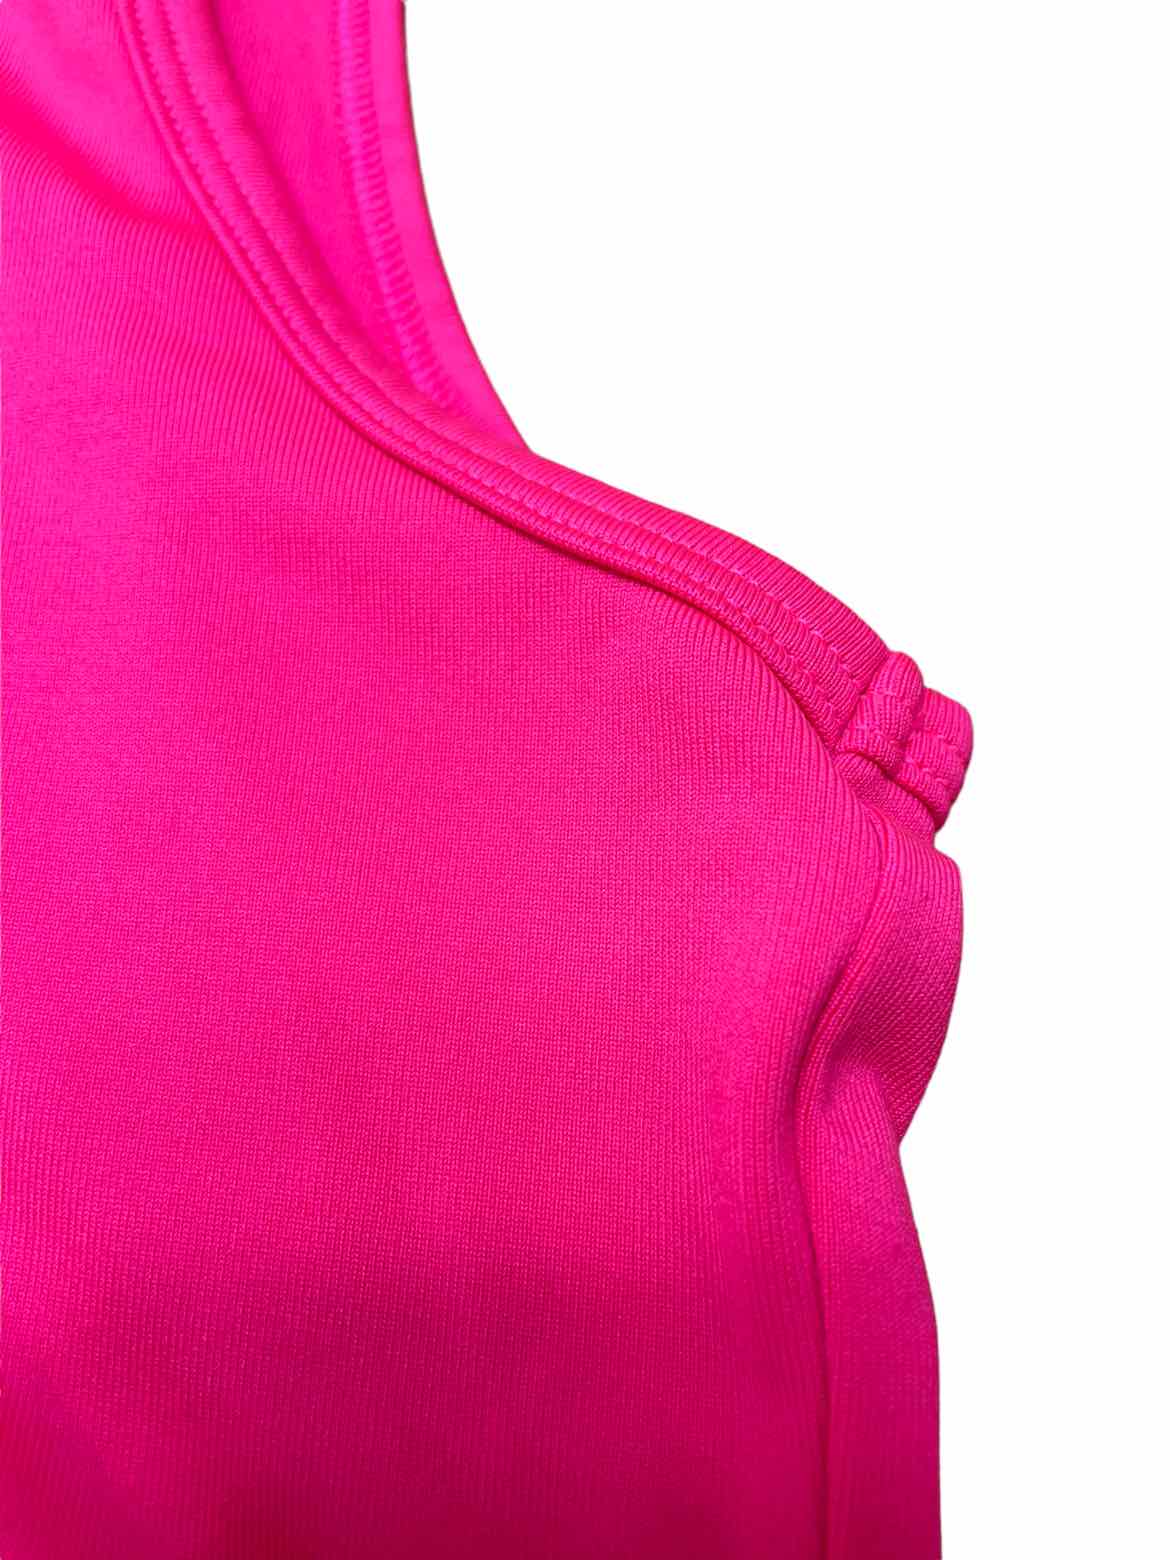 Under Armour Size S Neon Pink Polyester logo Active Wear Shirt